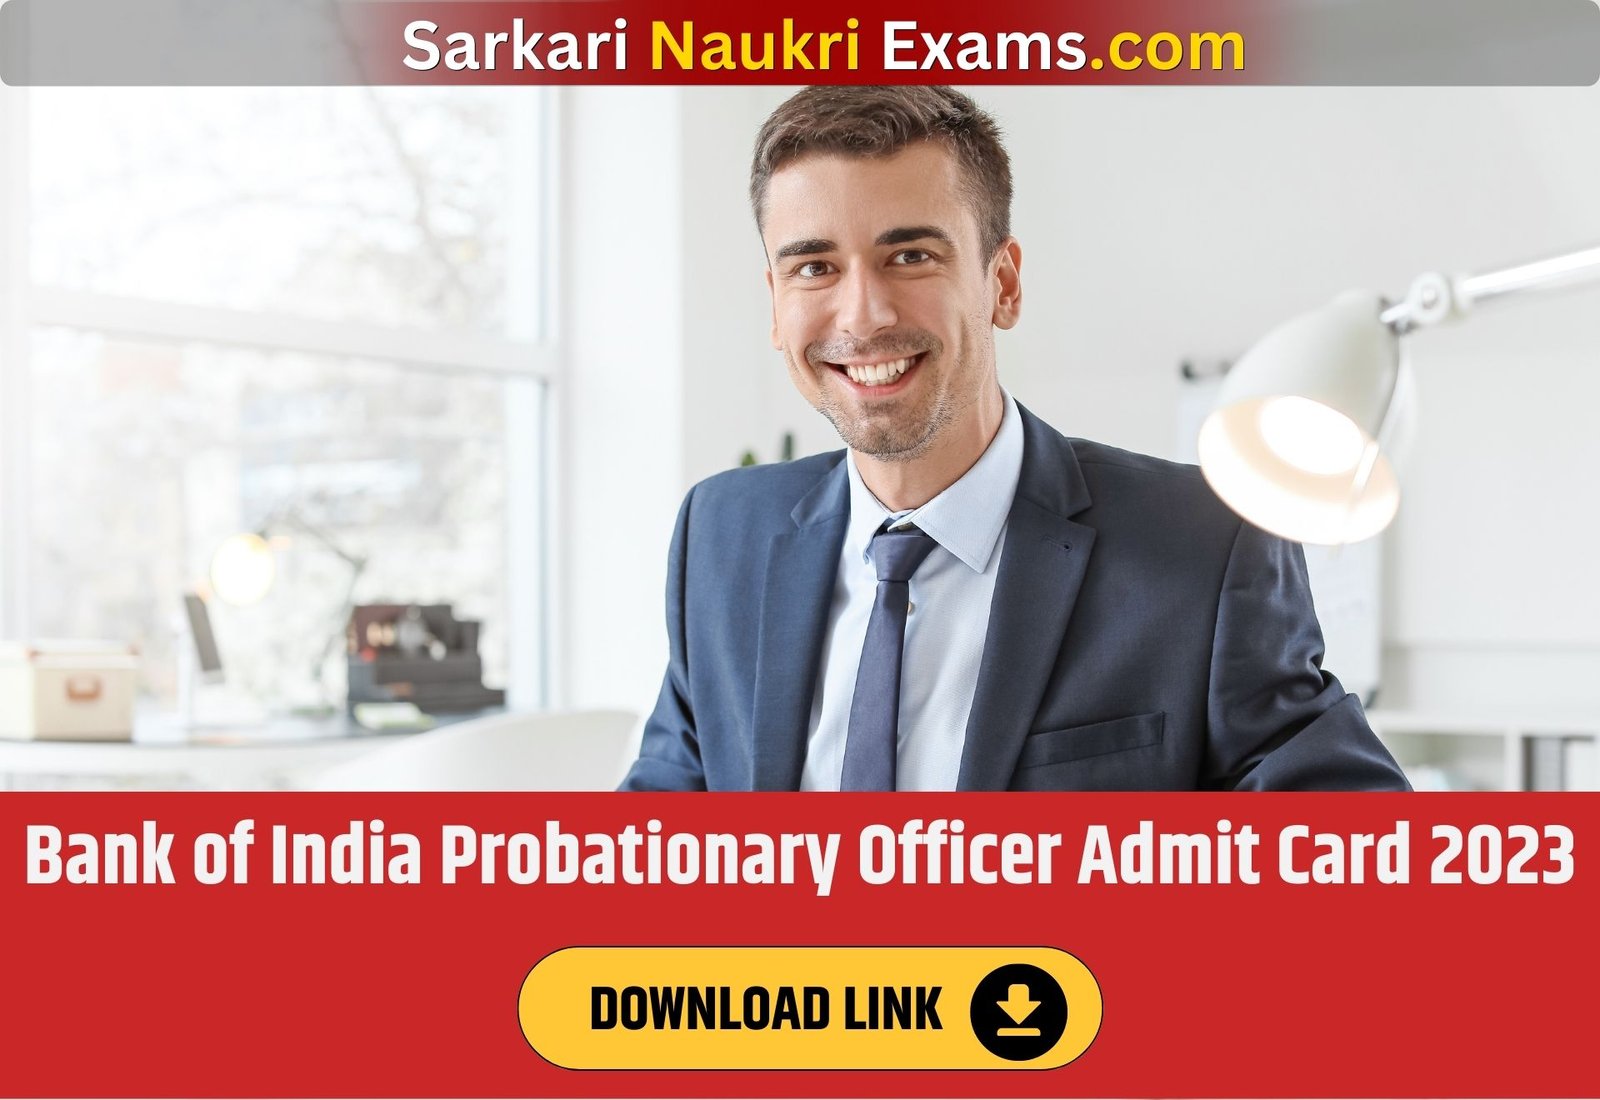 Bank of India Probationary Officer Admit Card 2023 | PDF Download Link, [Exam Pattern]